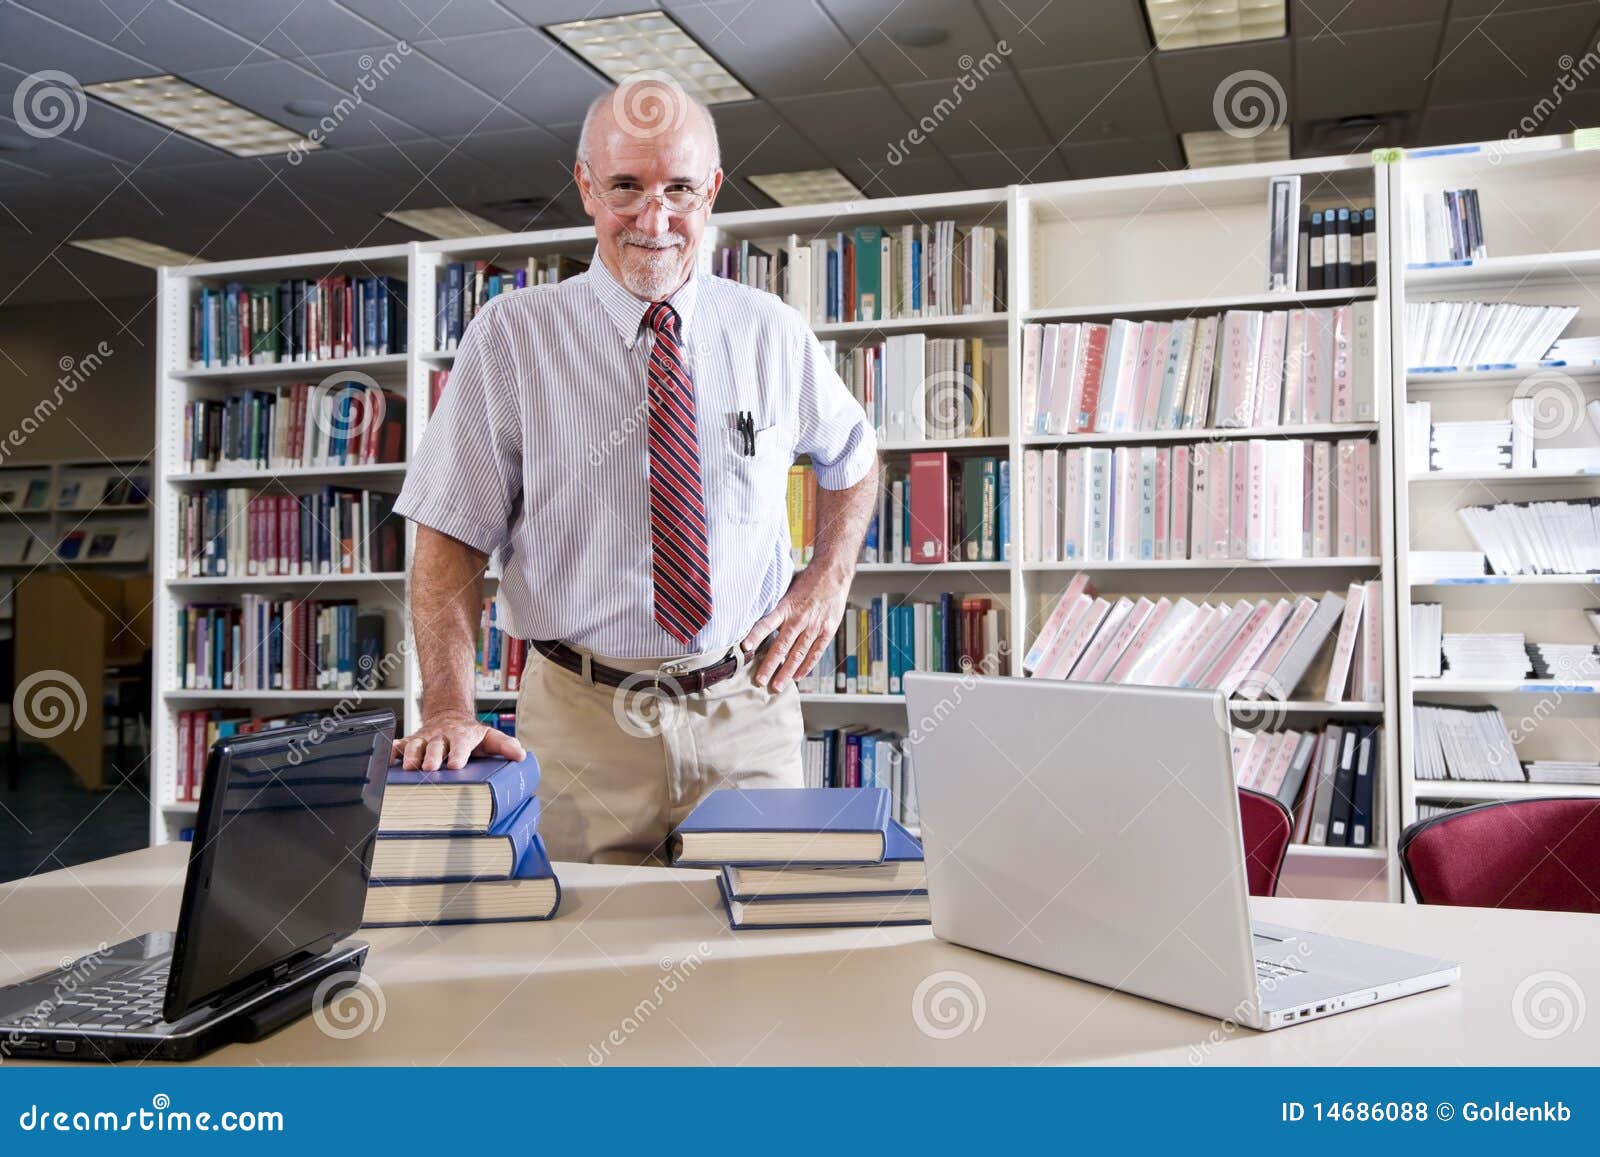 mature man at library table with textbooks